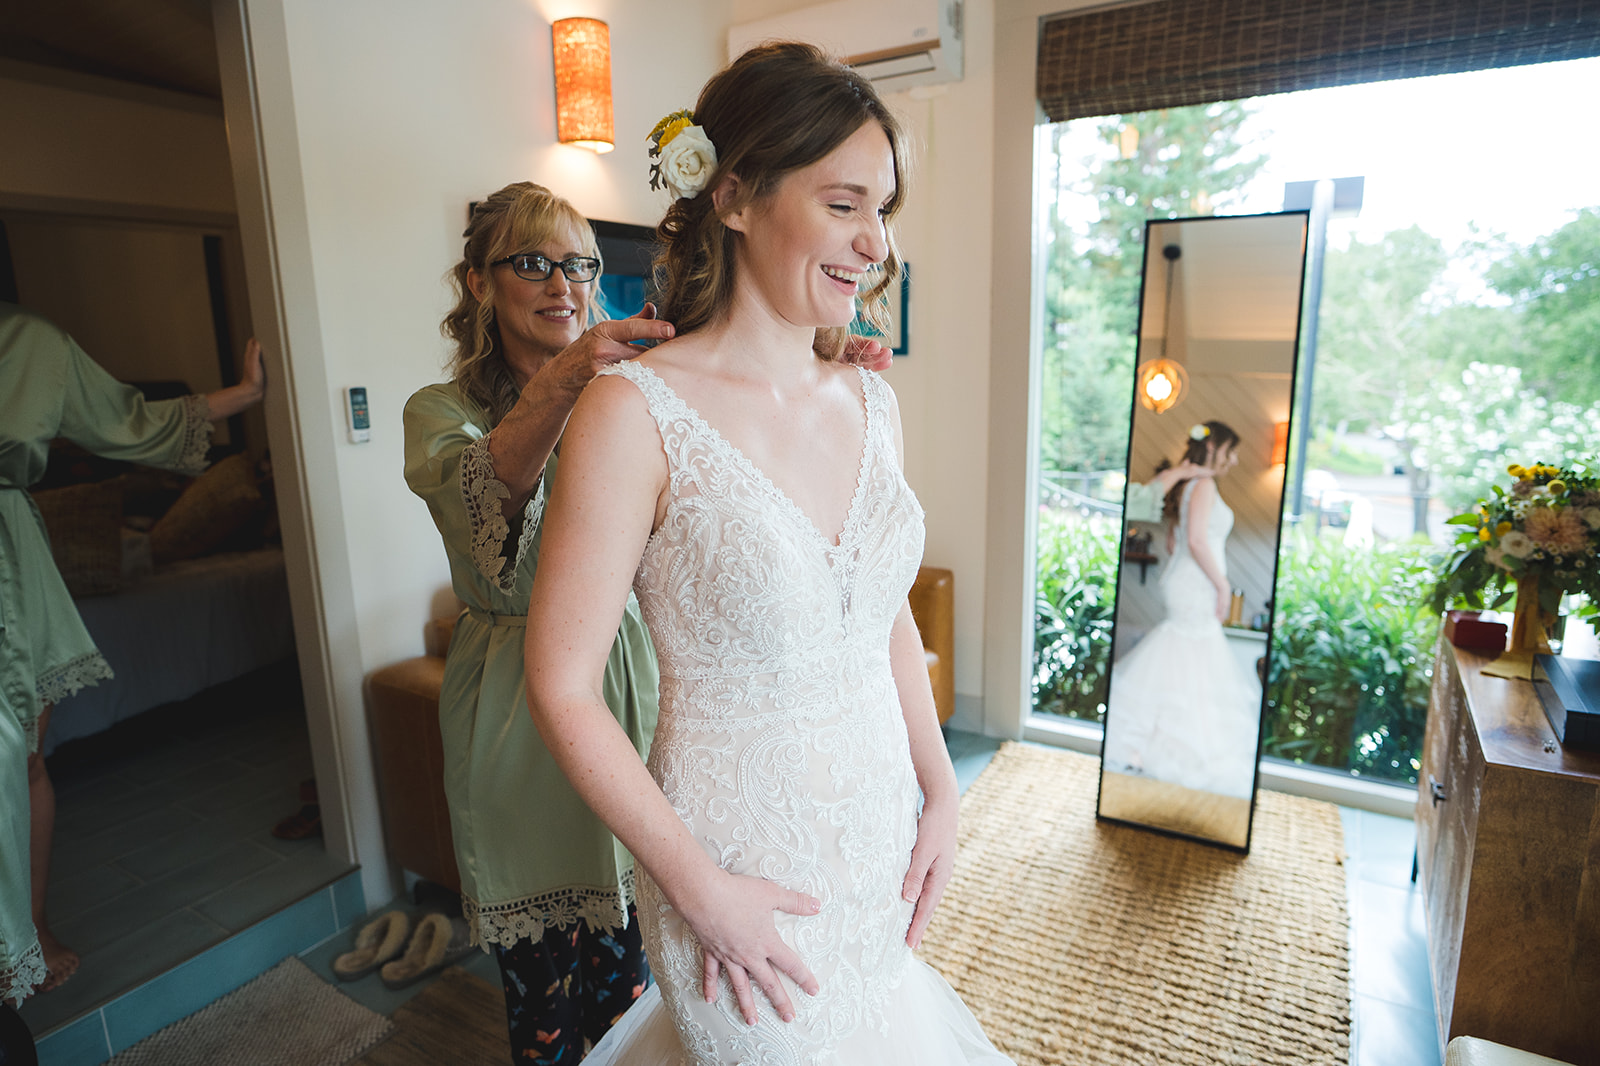 Bridesmaids helping the bride with her stunning wedding gown